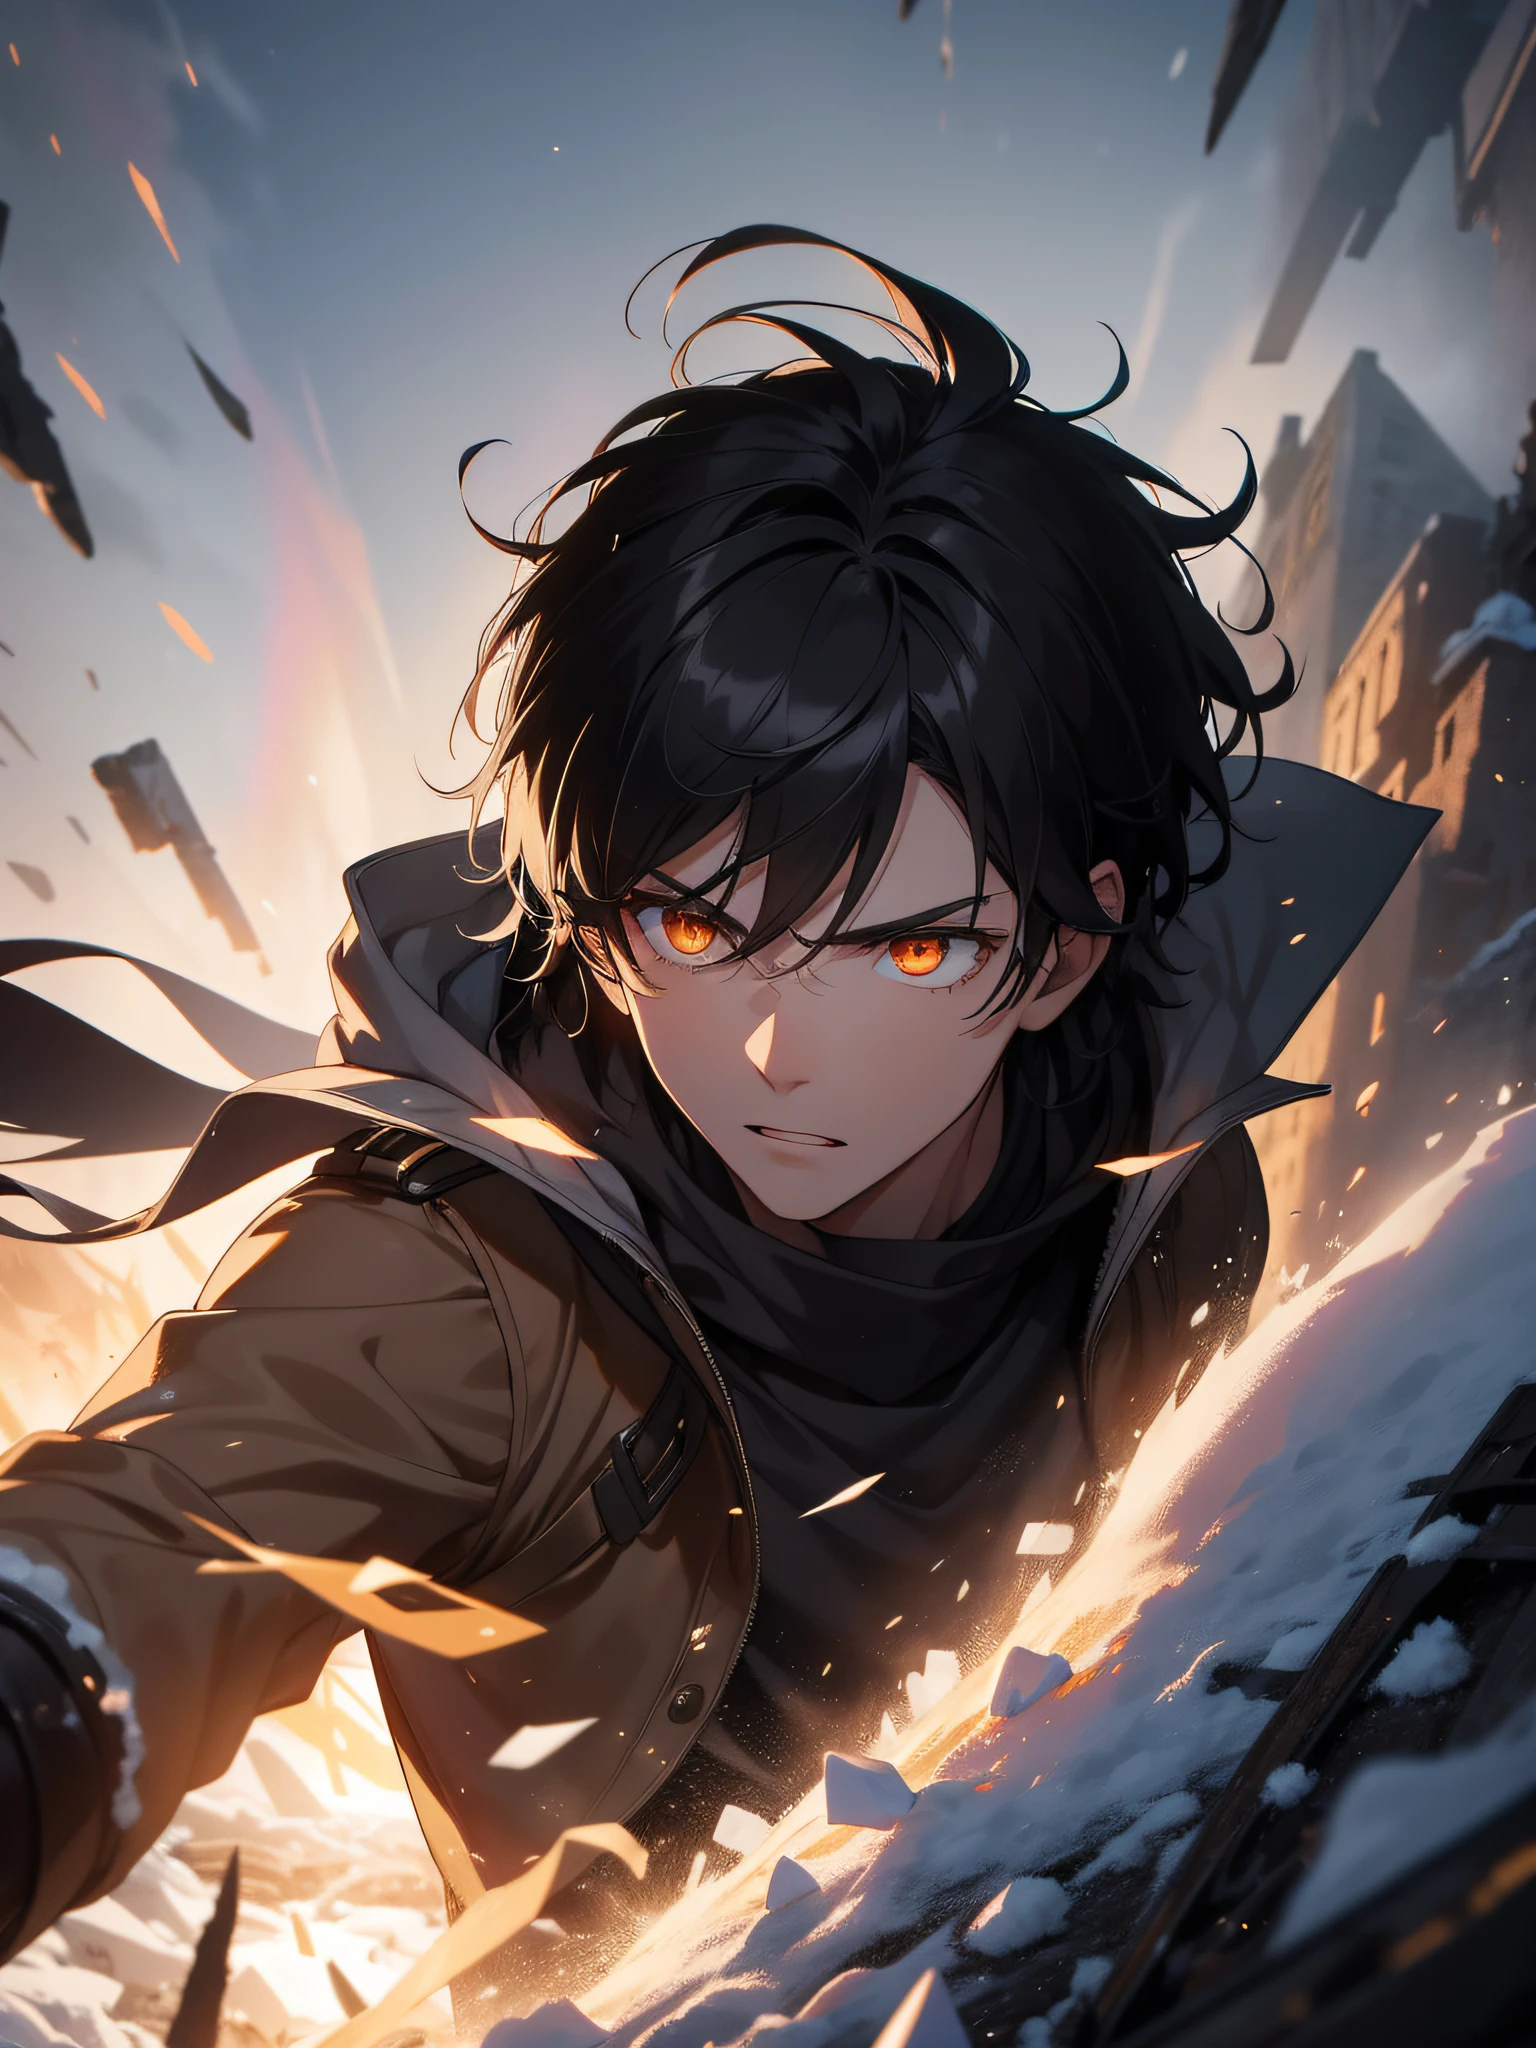 An epic scene where, in the middle of a destroyed and cold village, covered in dense snow, the protagonist, a young man with dark hair and glowing golden eyes, bruised by the confrontation, awakens the power of fire